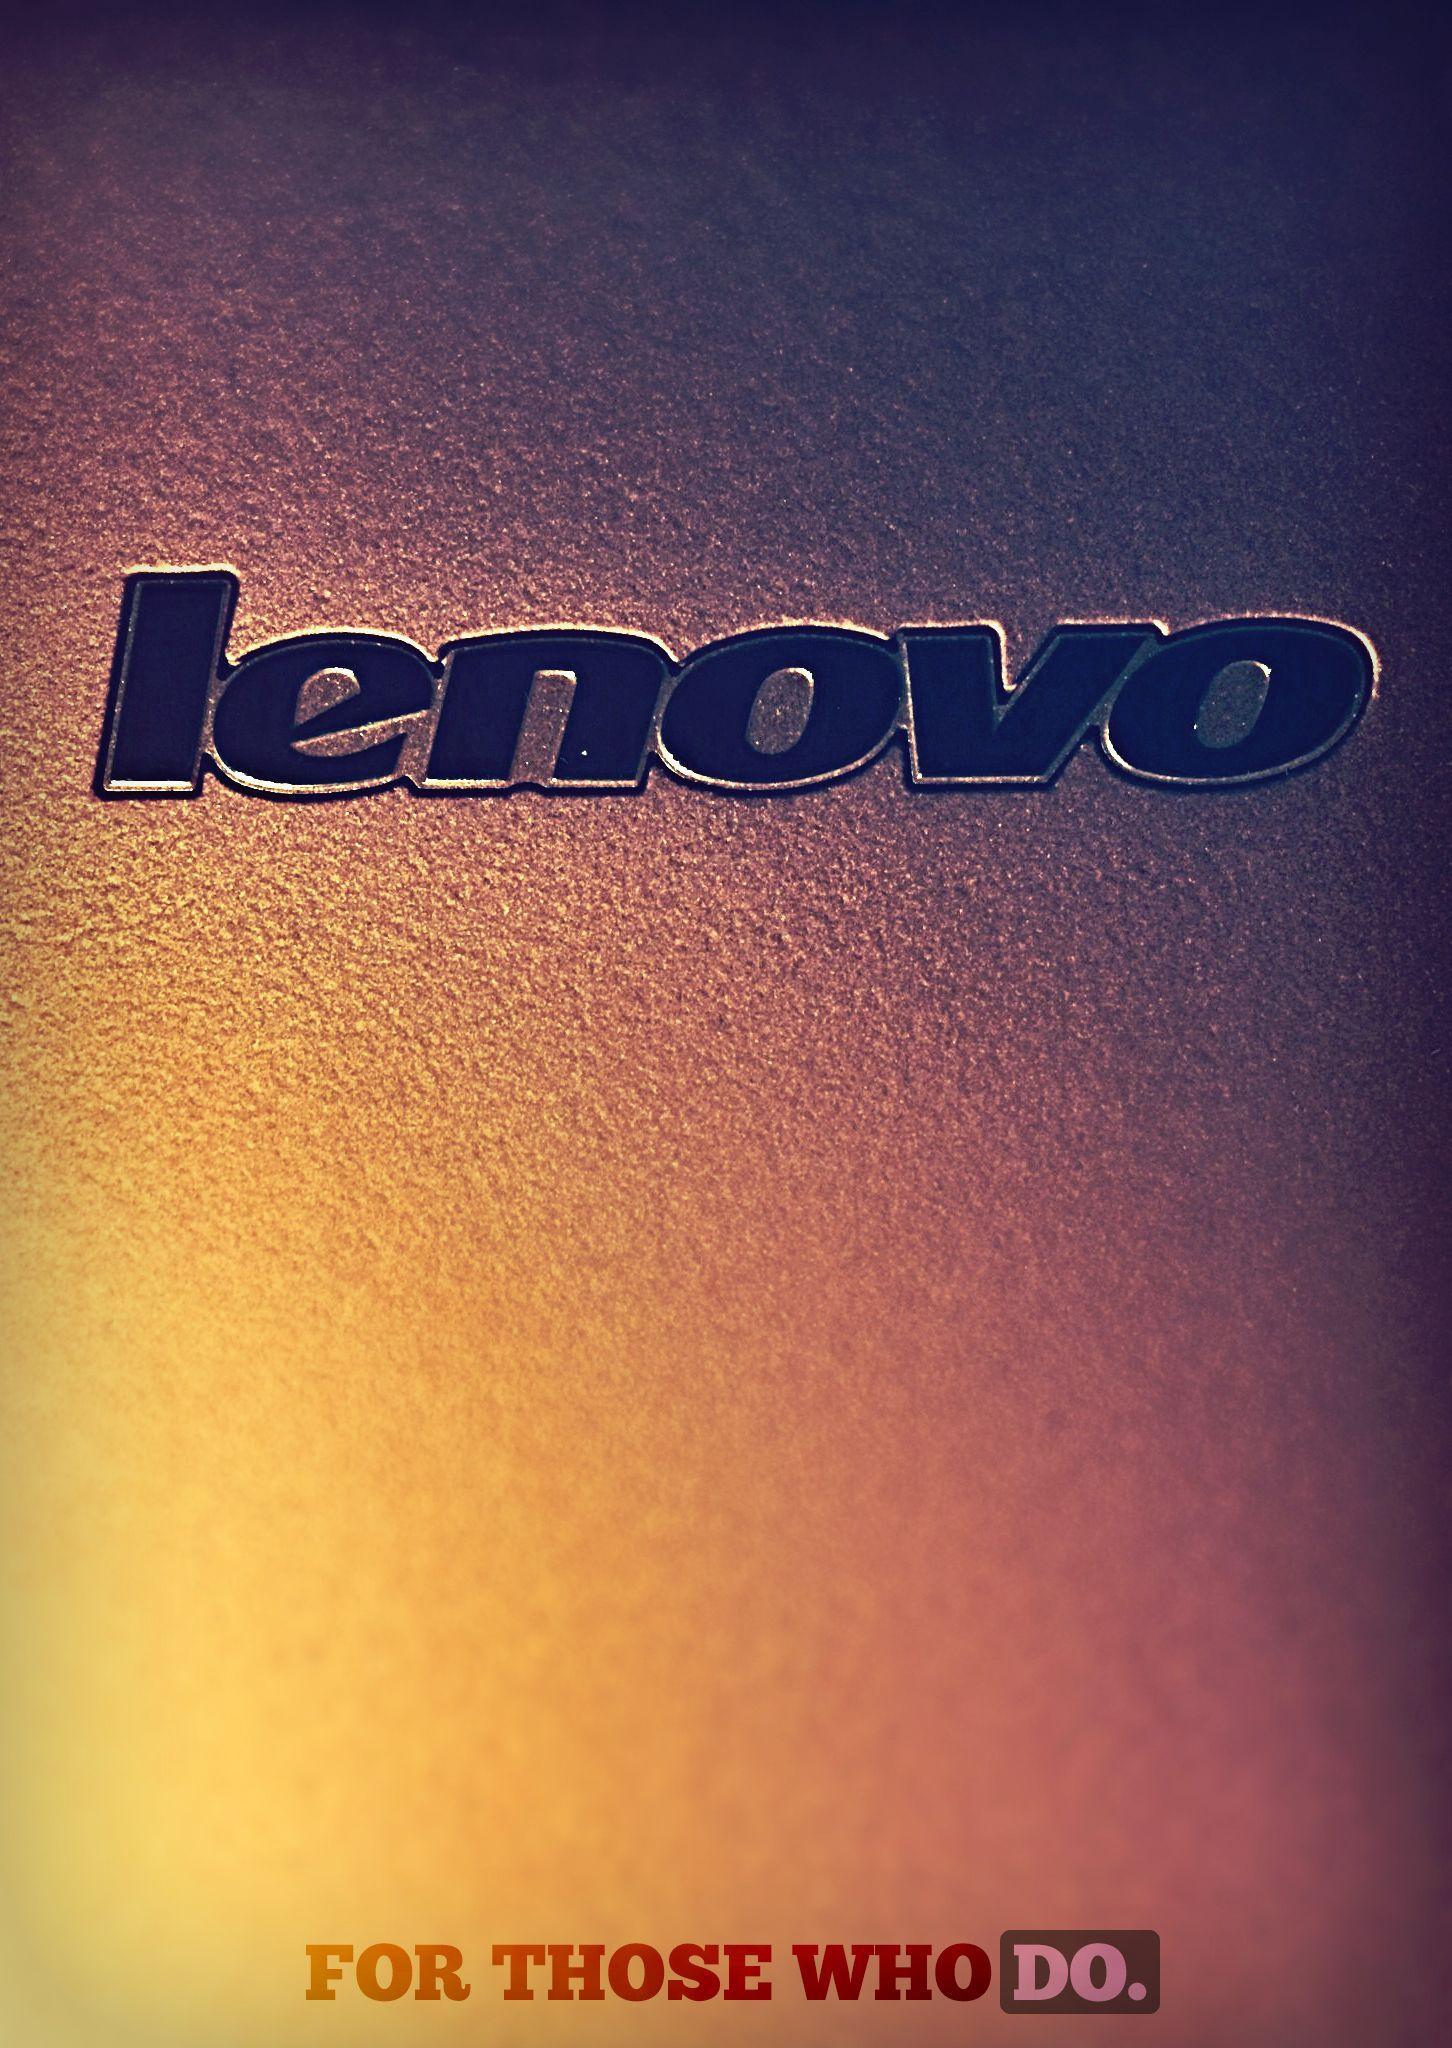 Lenovo Phone Wallpapers - Top Free Lenovo Phone Backgrounds -  WallpaperAccess